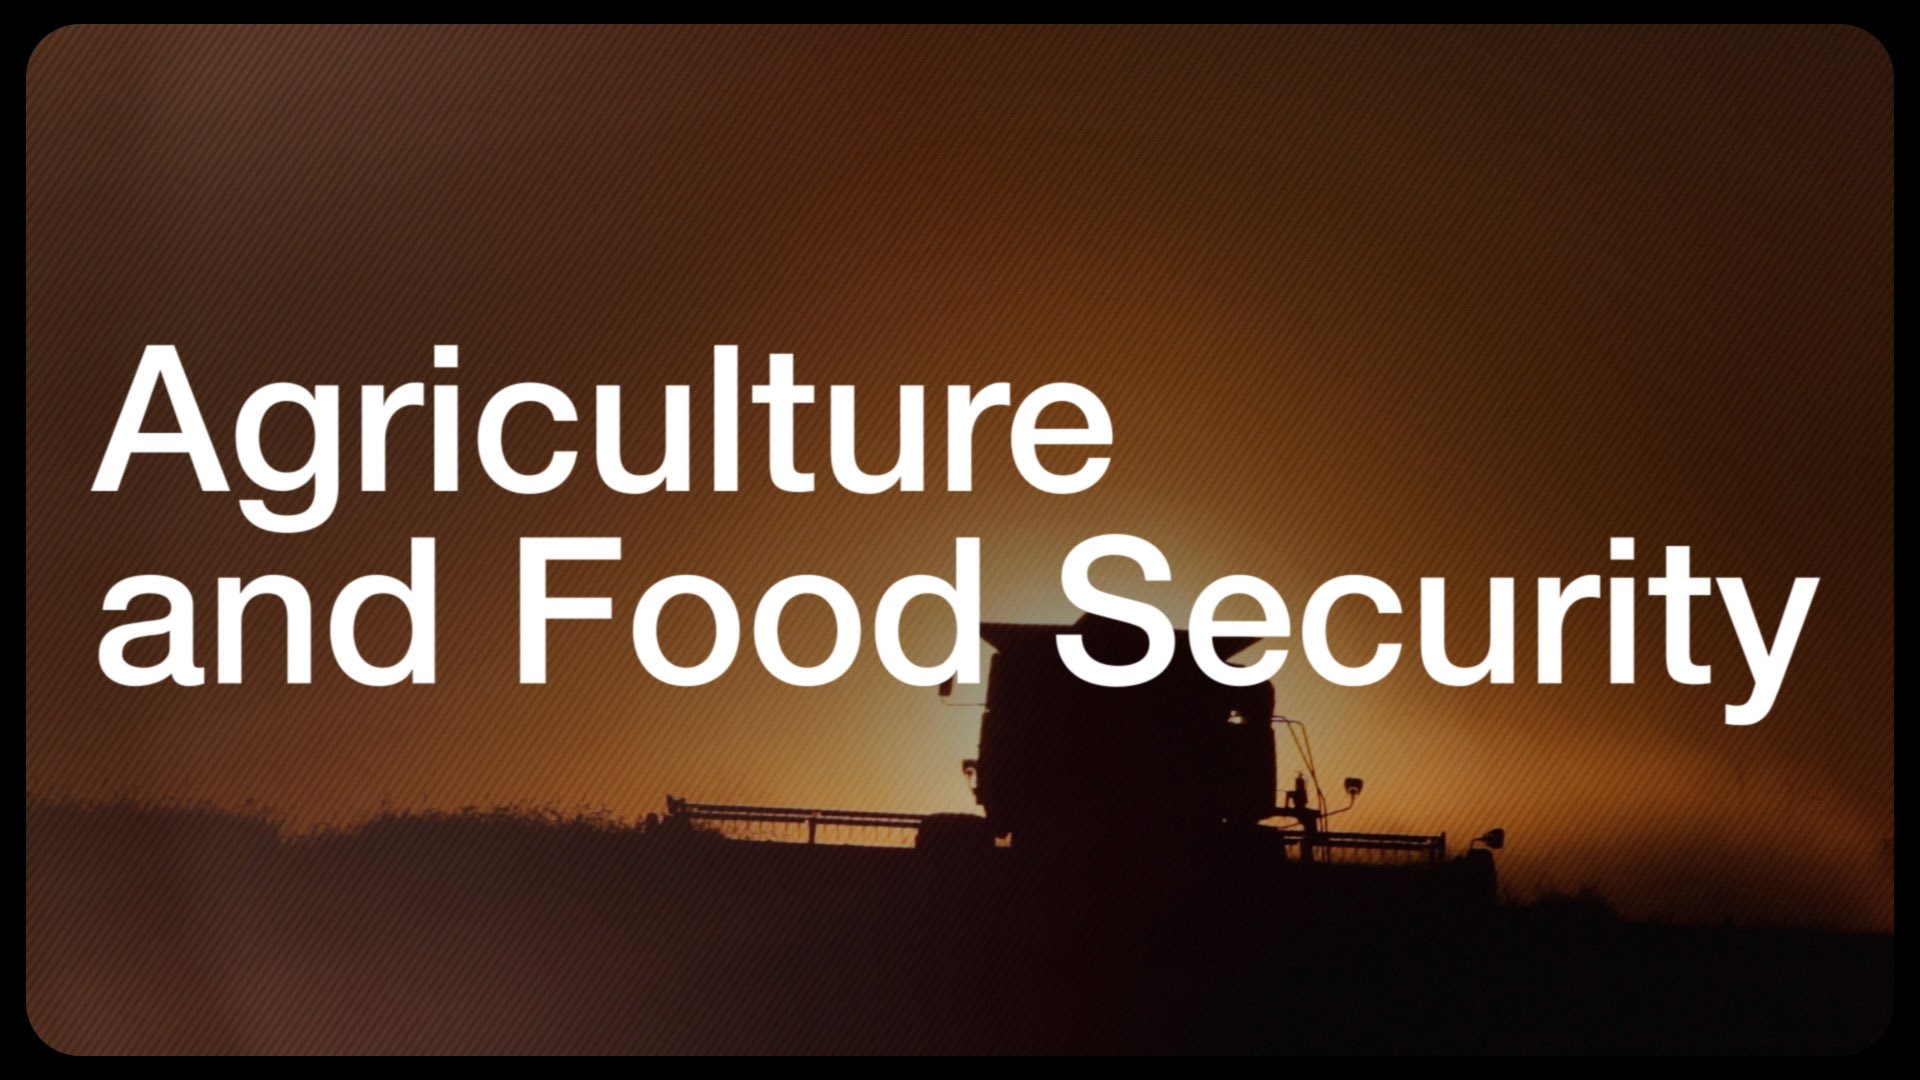 GIS and Remote Sensing in Agriculture, Food Security and Climate Change Course, Nairobi, Kenya